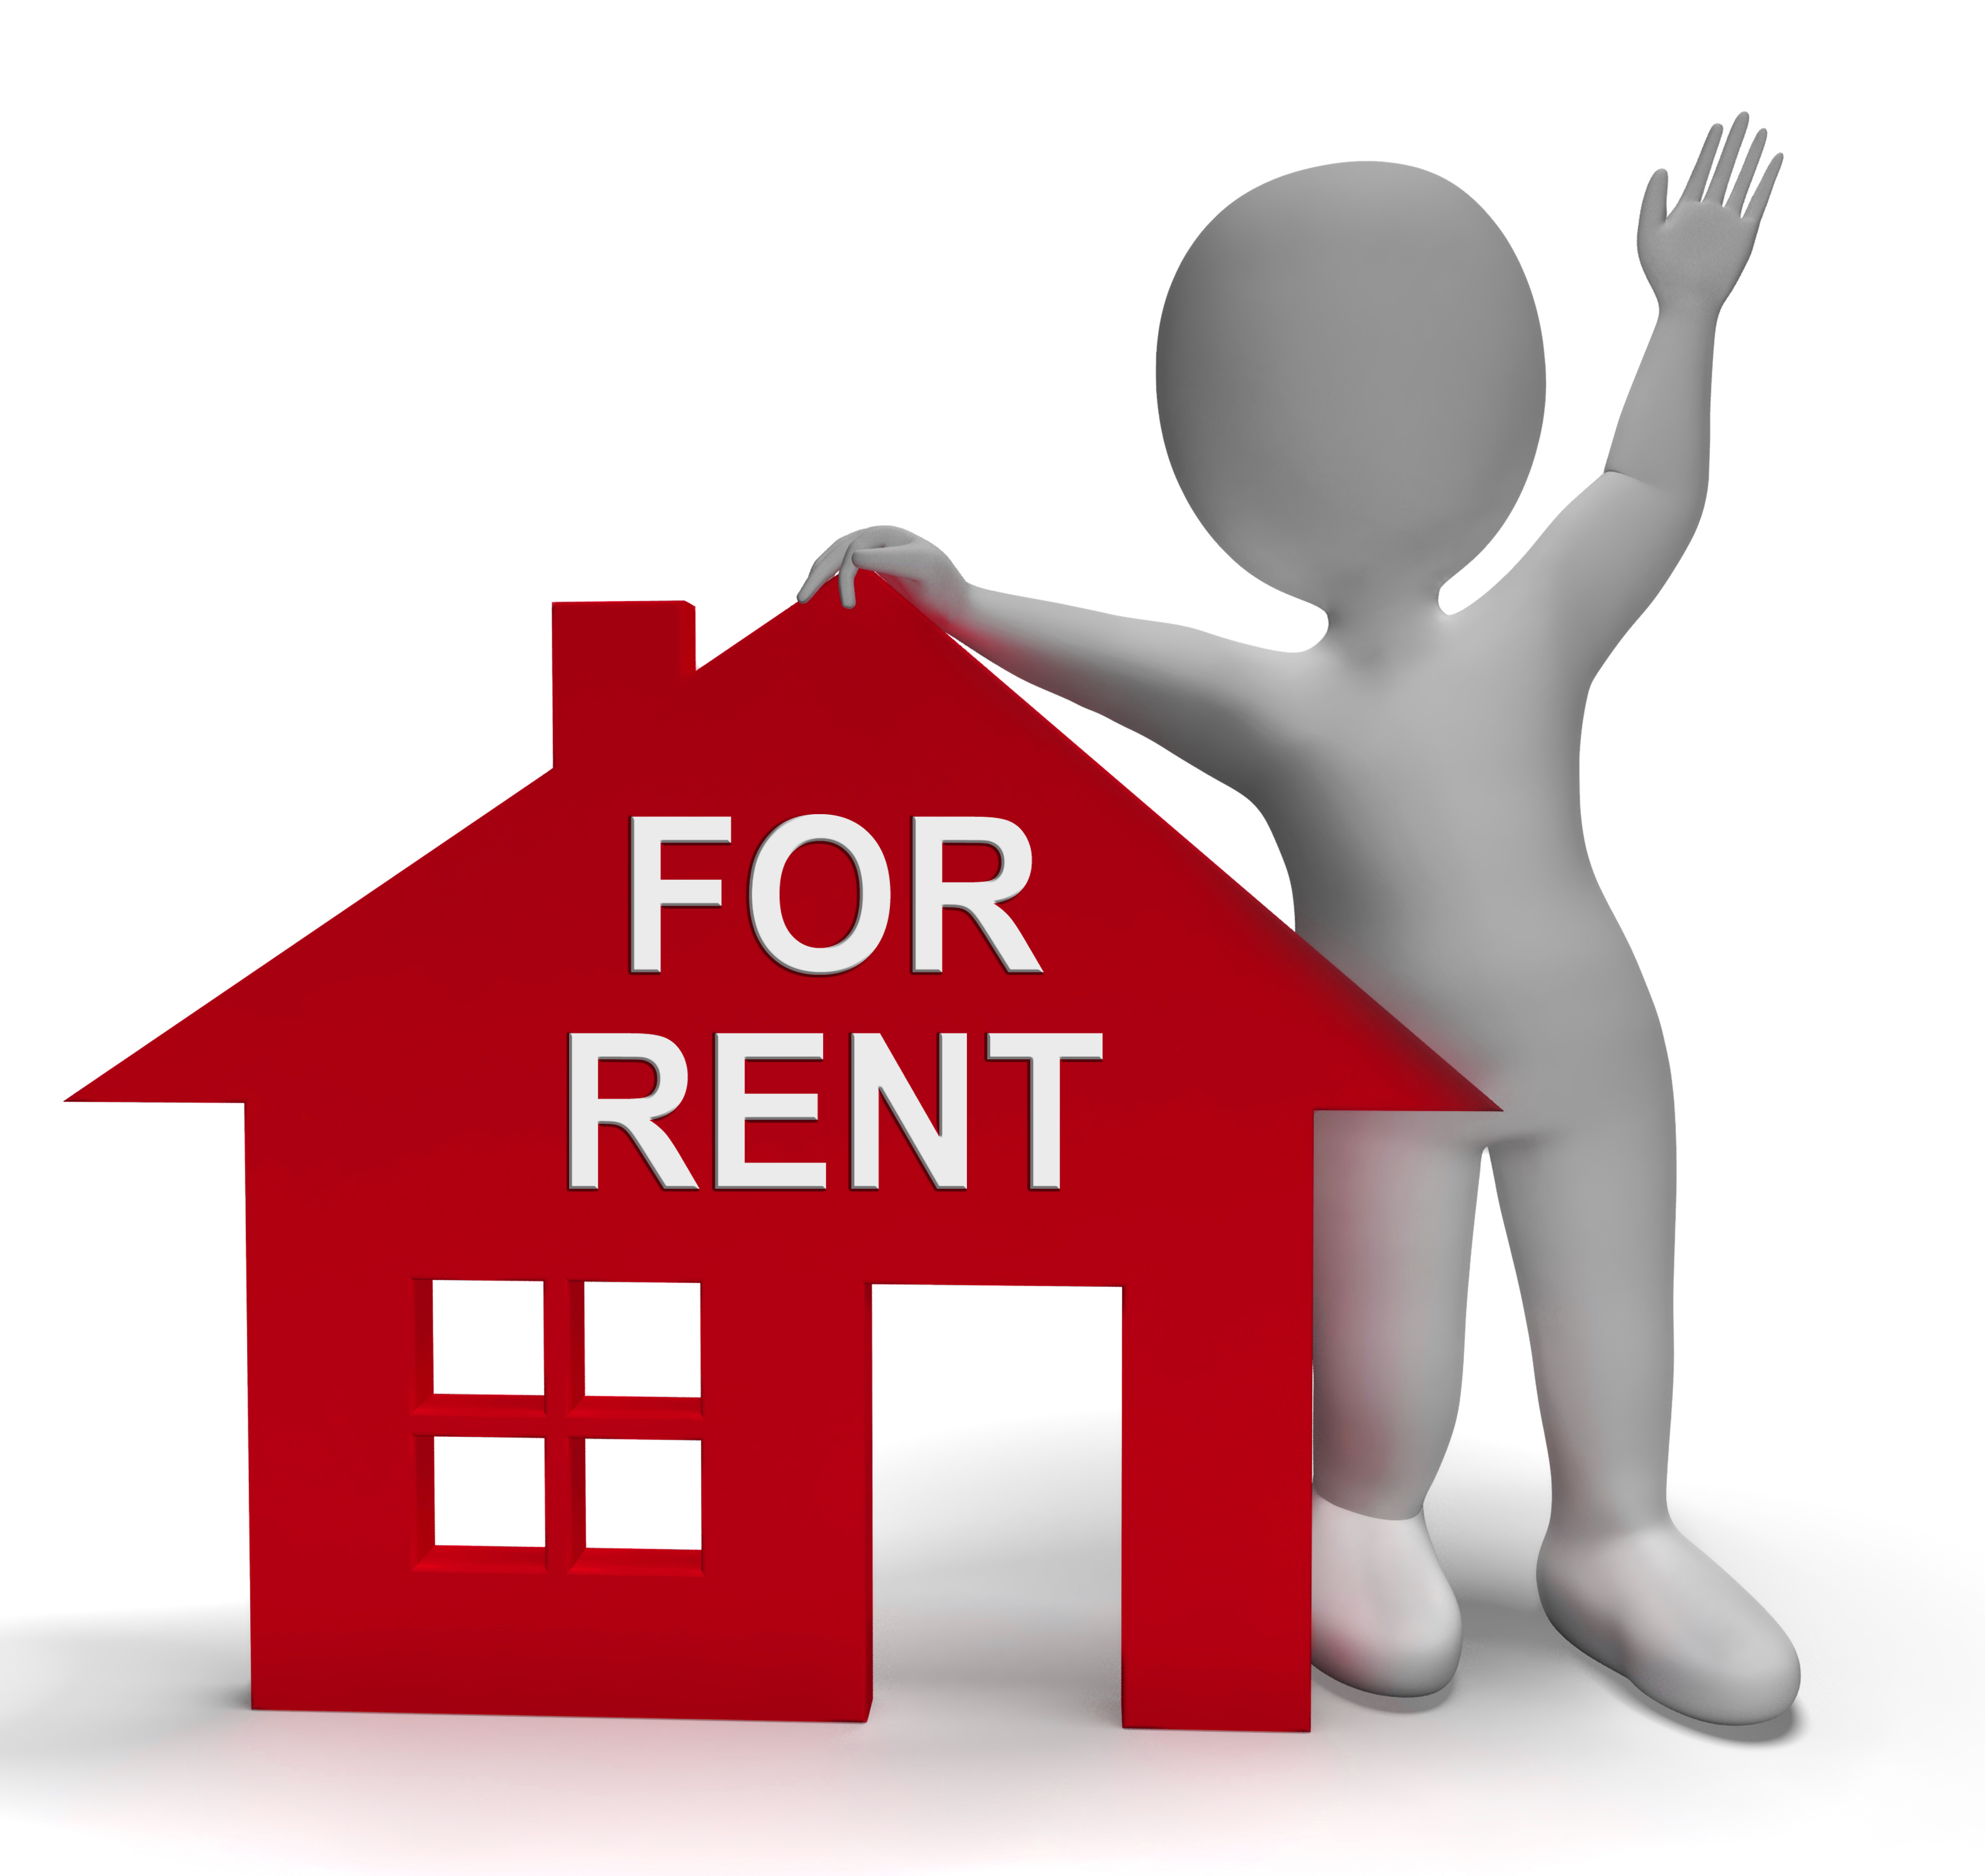 For Rent House Showing Rental Or Lease Property